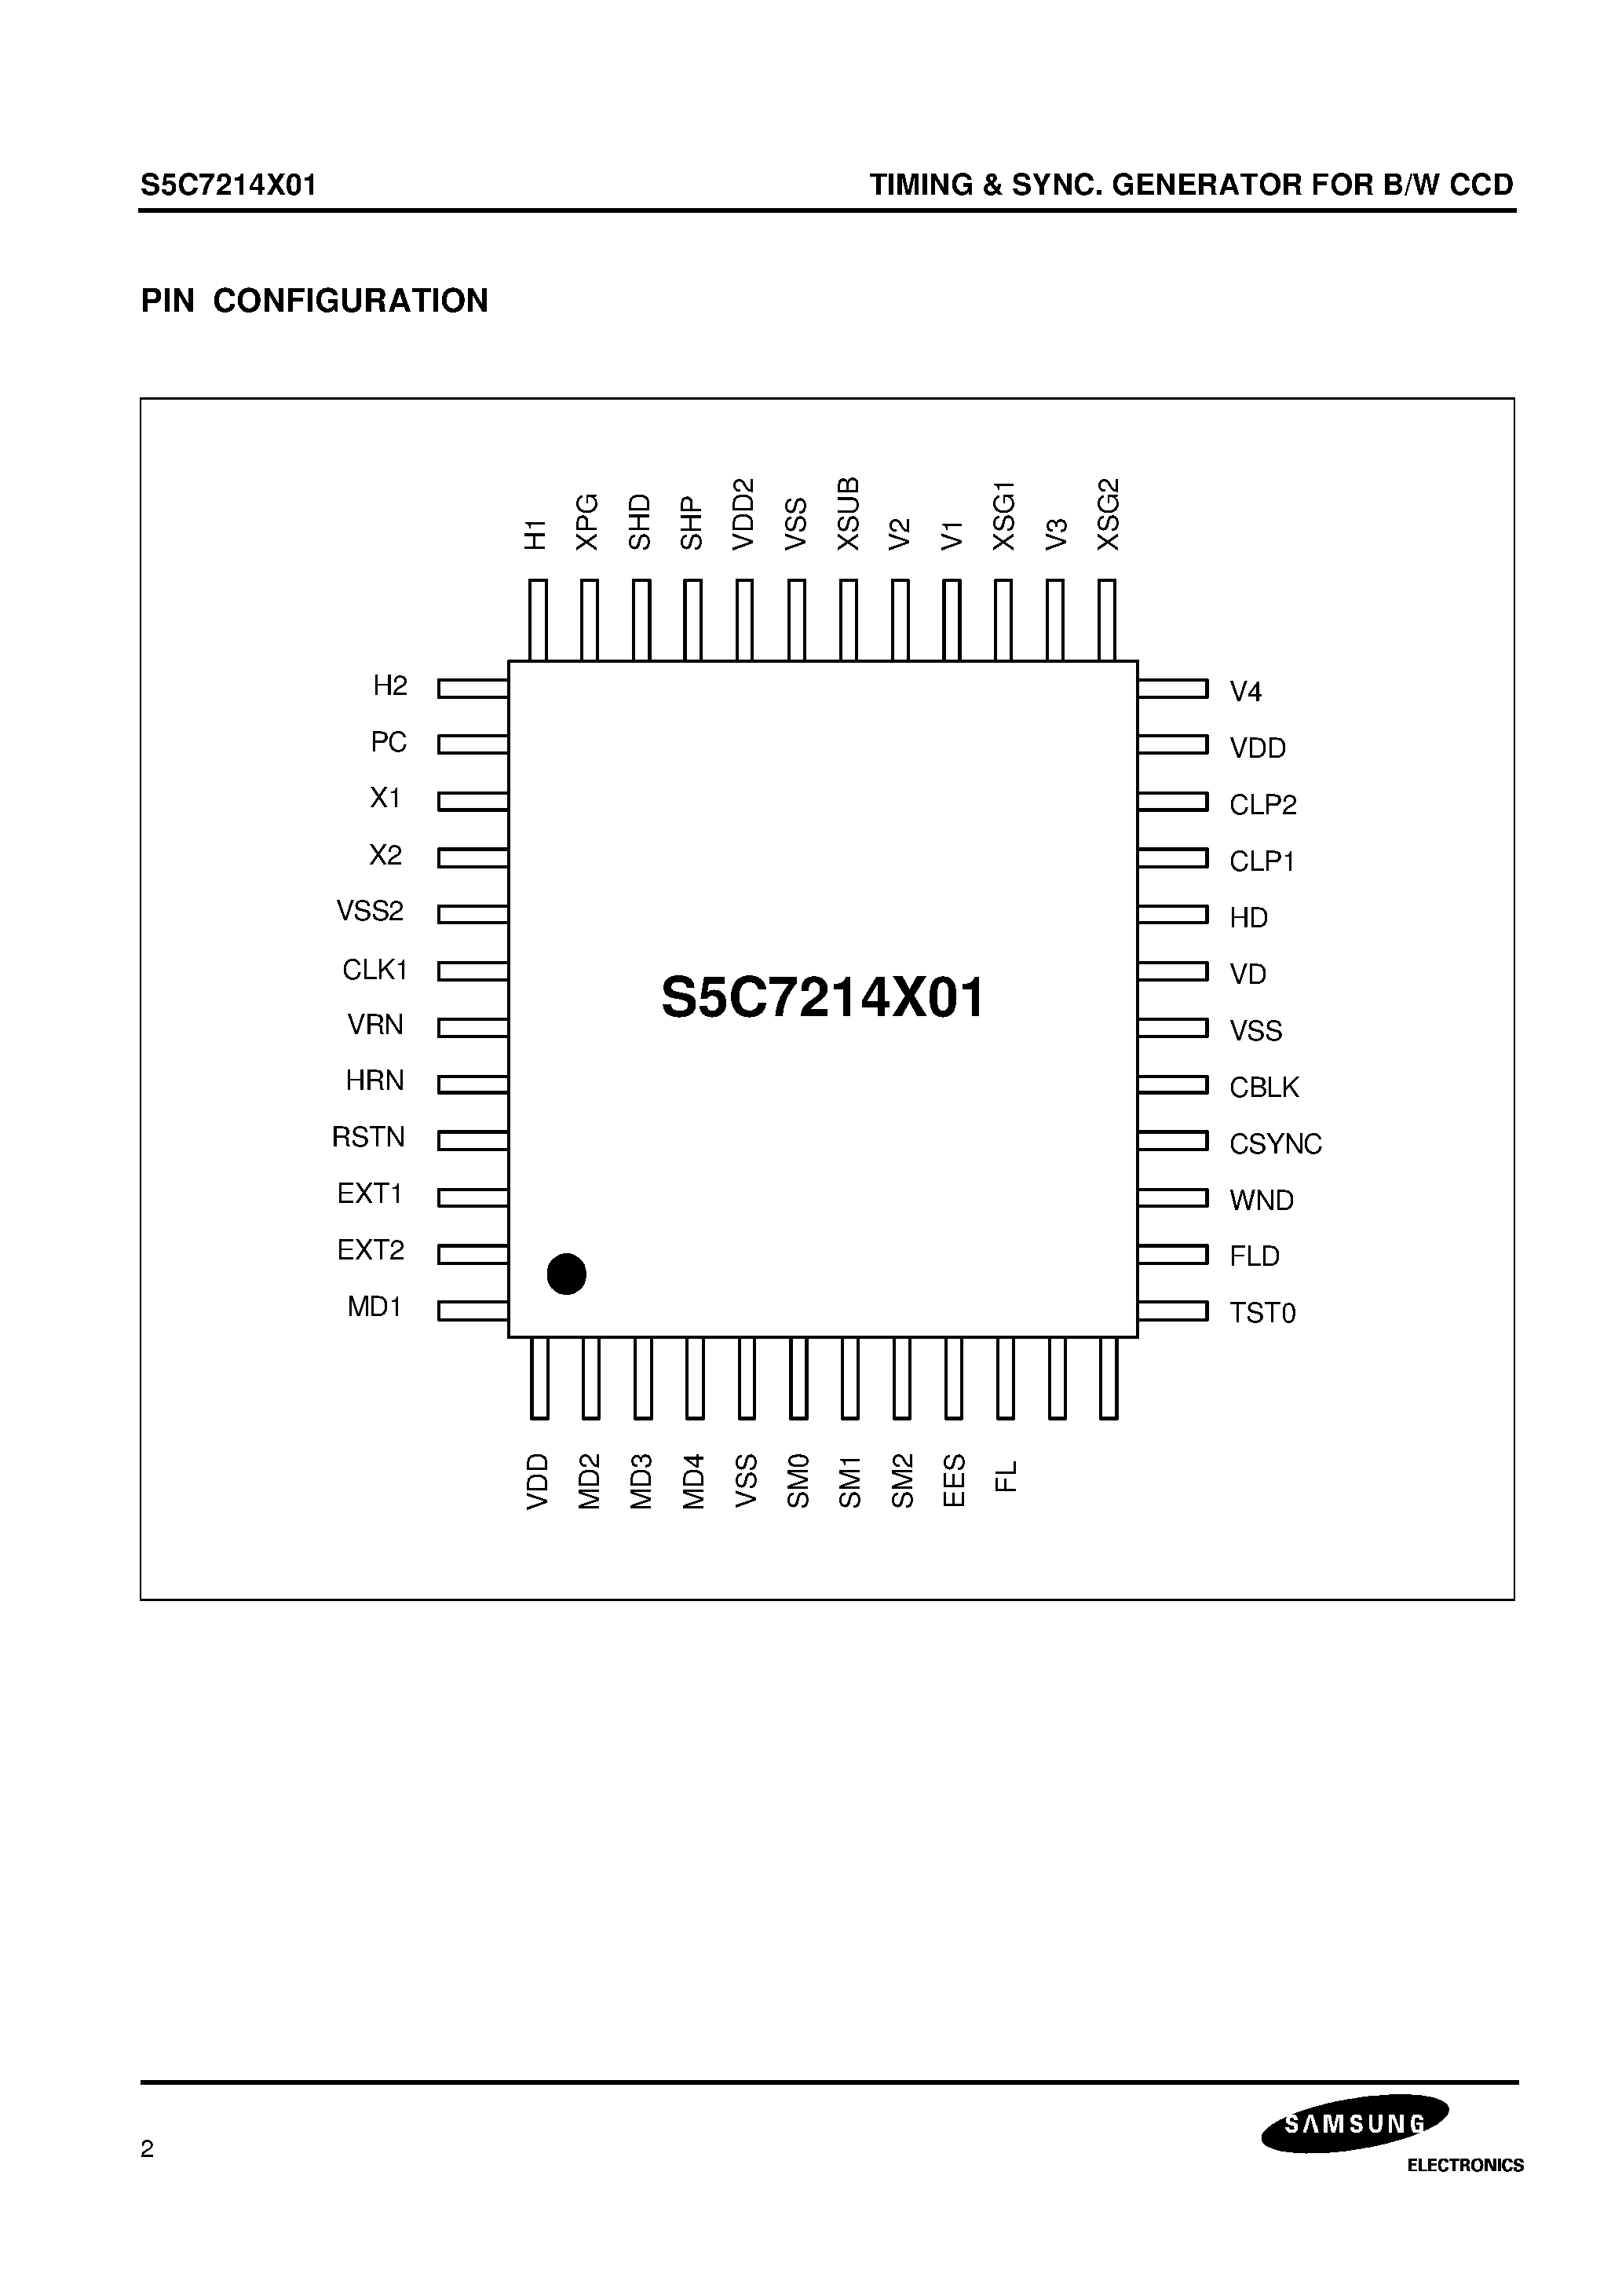 Datasheet S5C7214X01 - TIMING & SYNC. GENERATOR FOR B/W CCD page 2